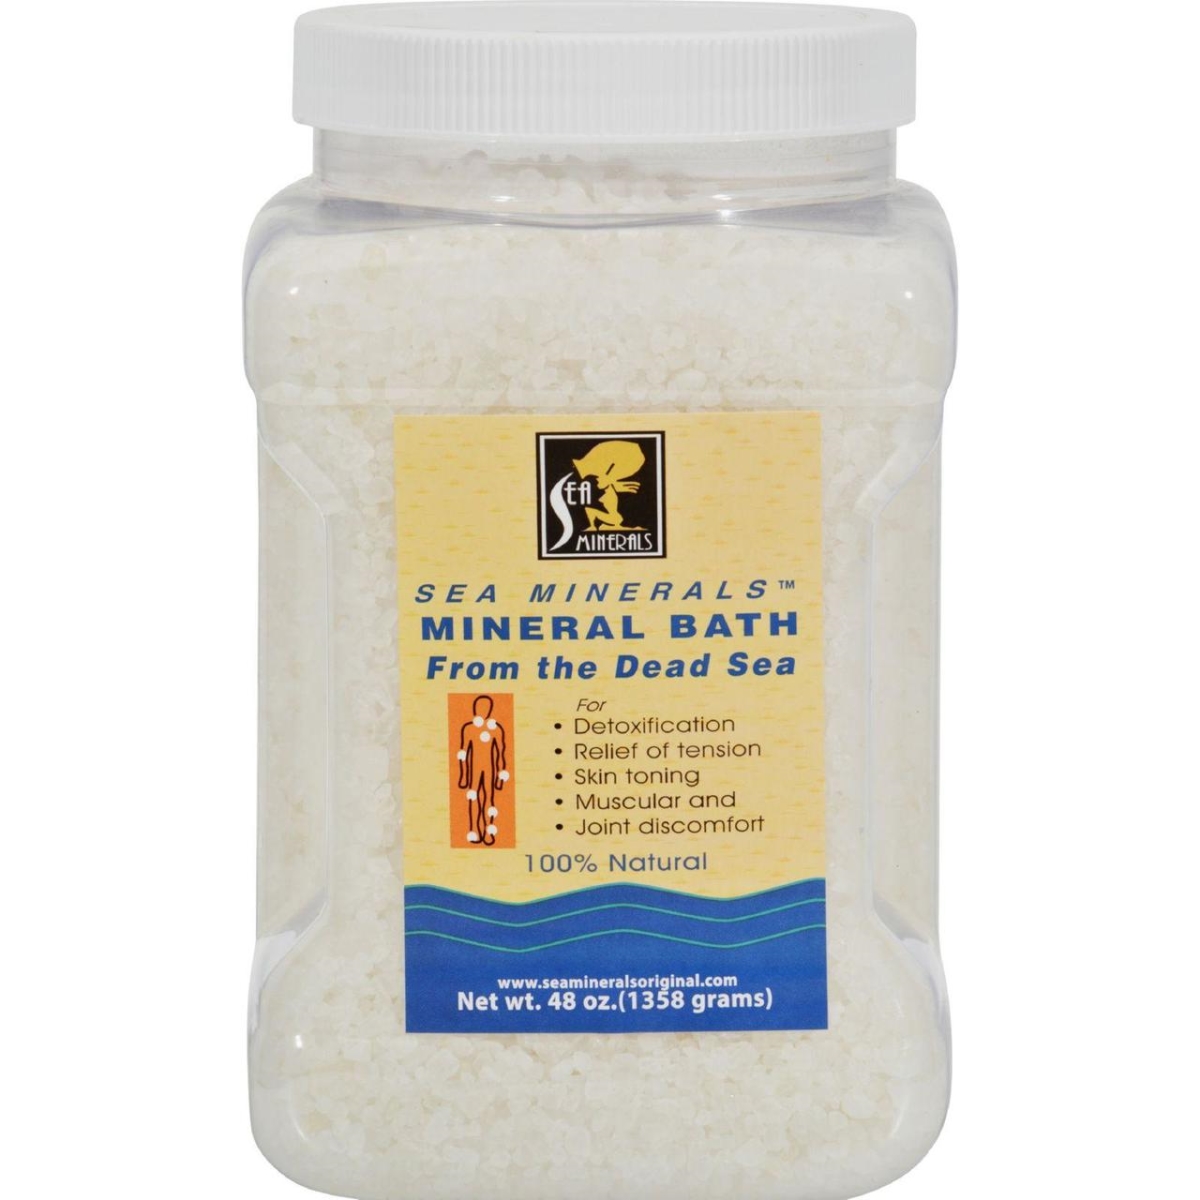 Hg0523894 48 Oz Mineral Bath From The Dead Sea